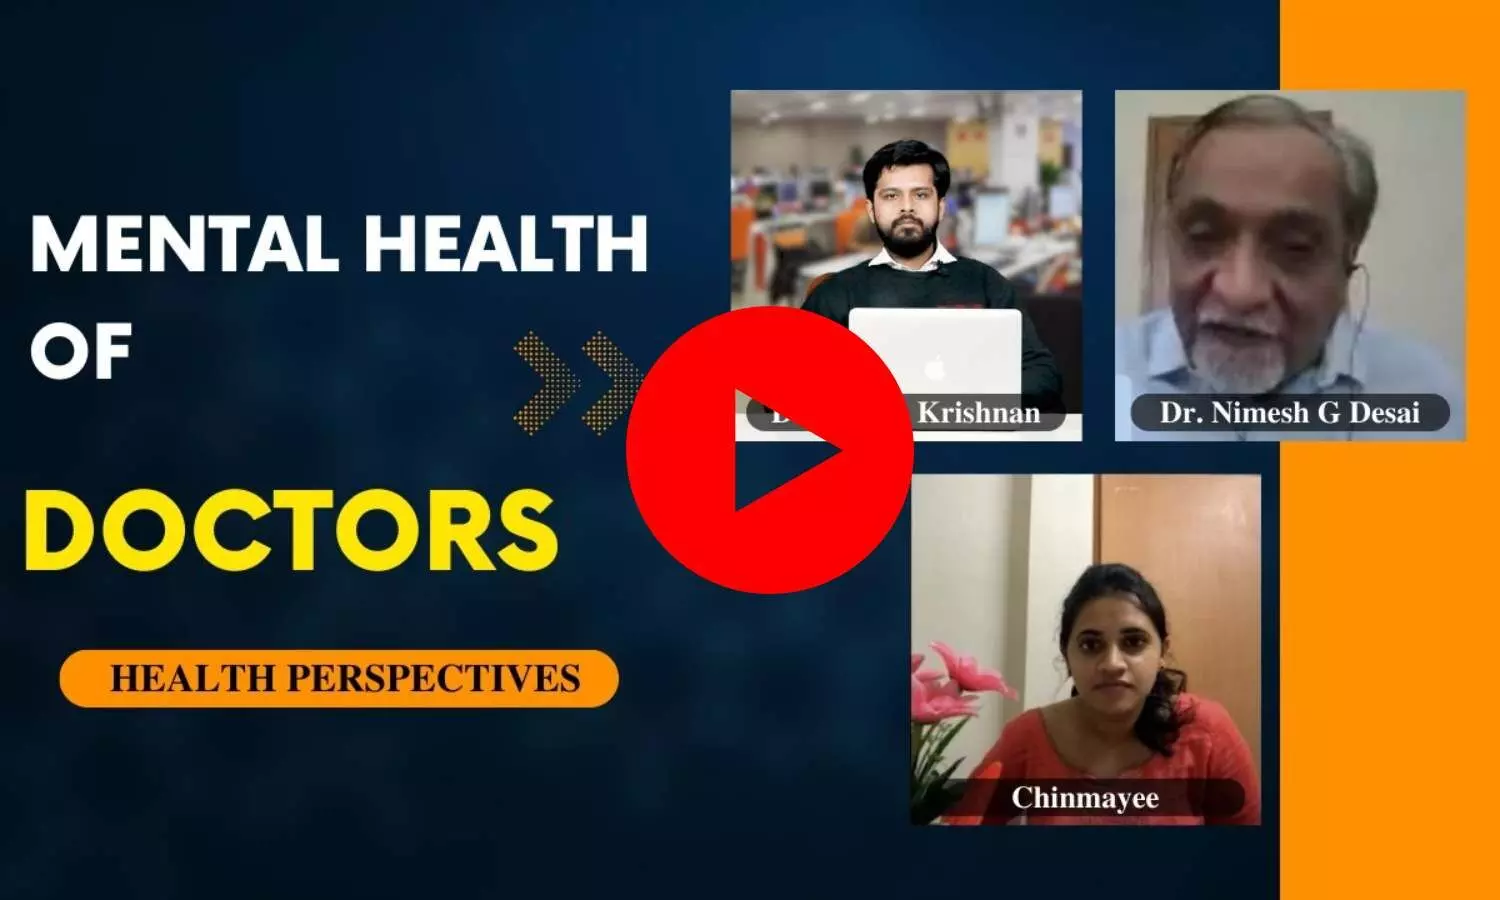 Health perspectives: Whats driving Young Indian Doctors to the edge of mental illness?